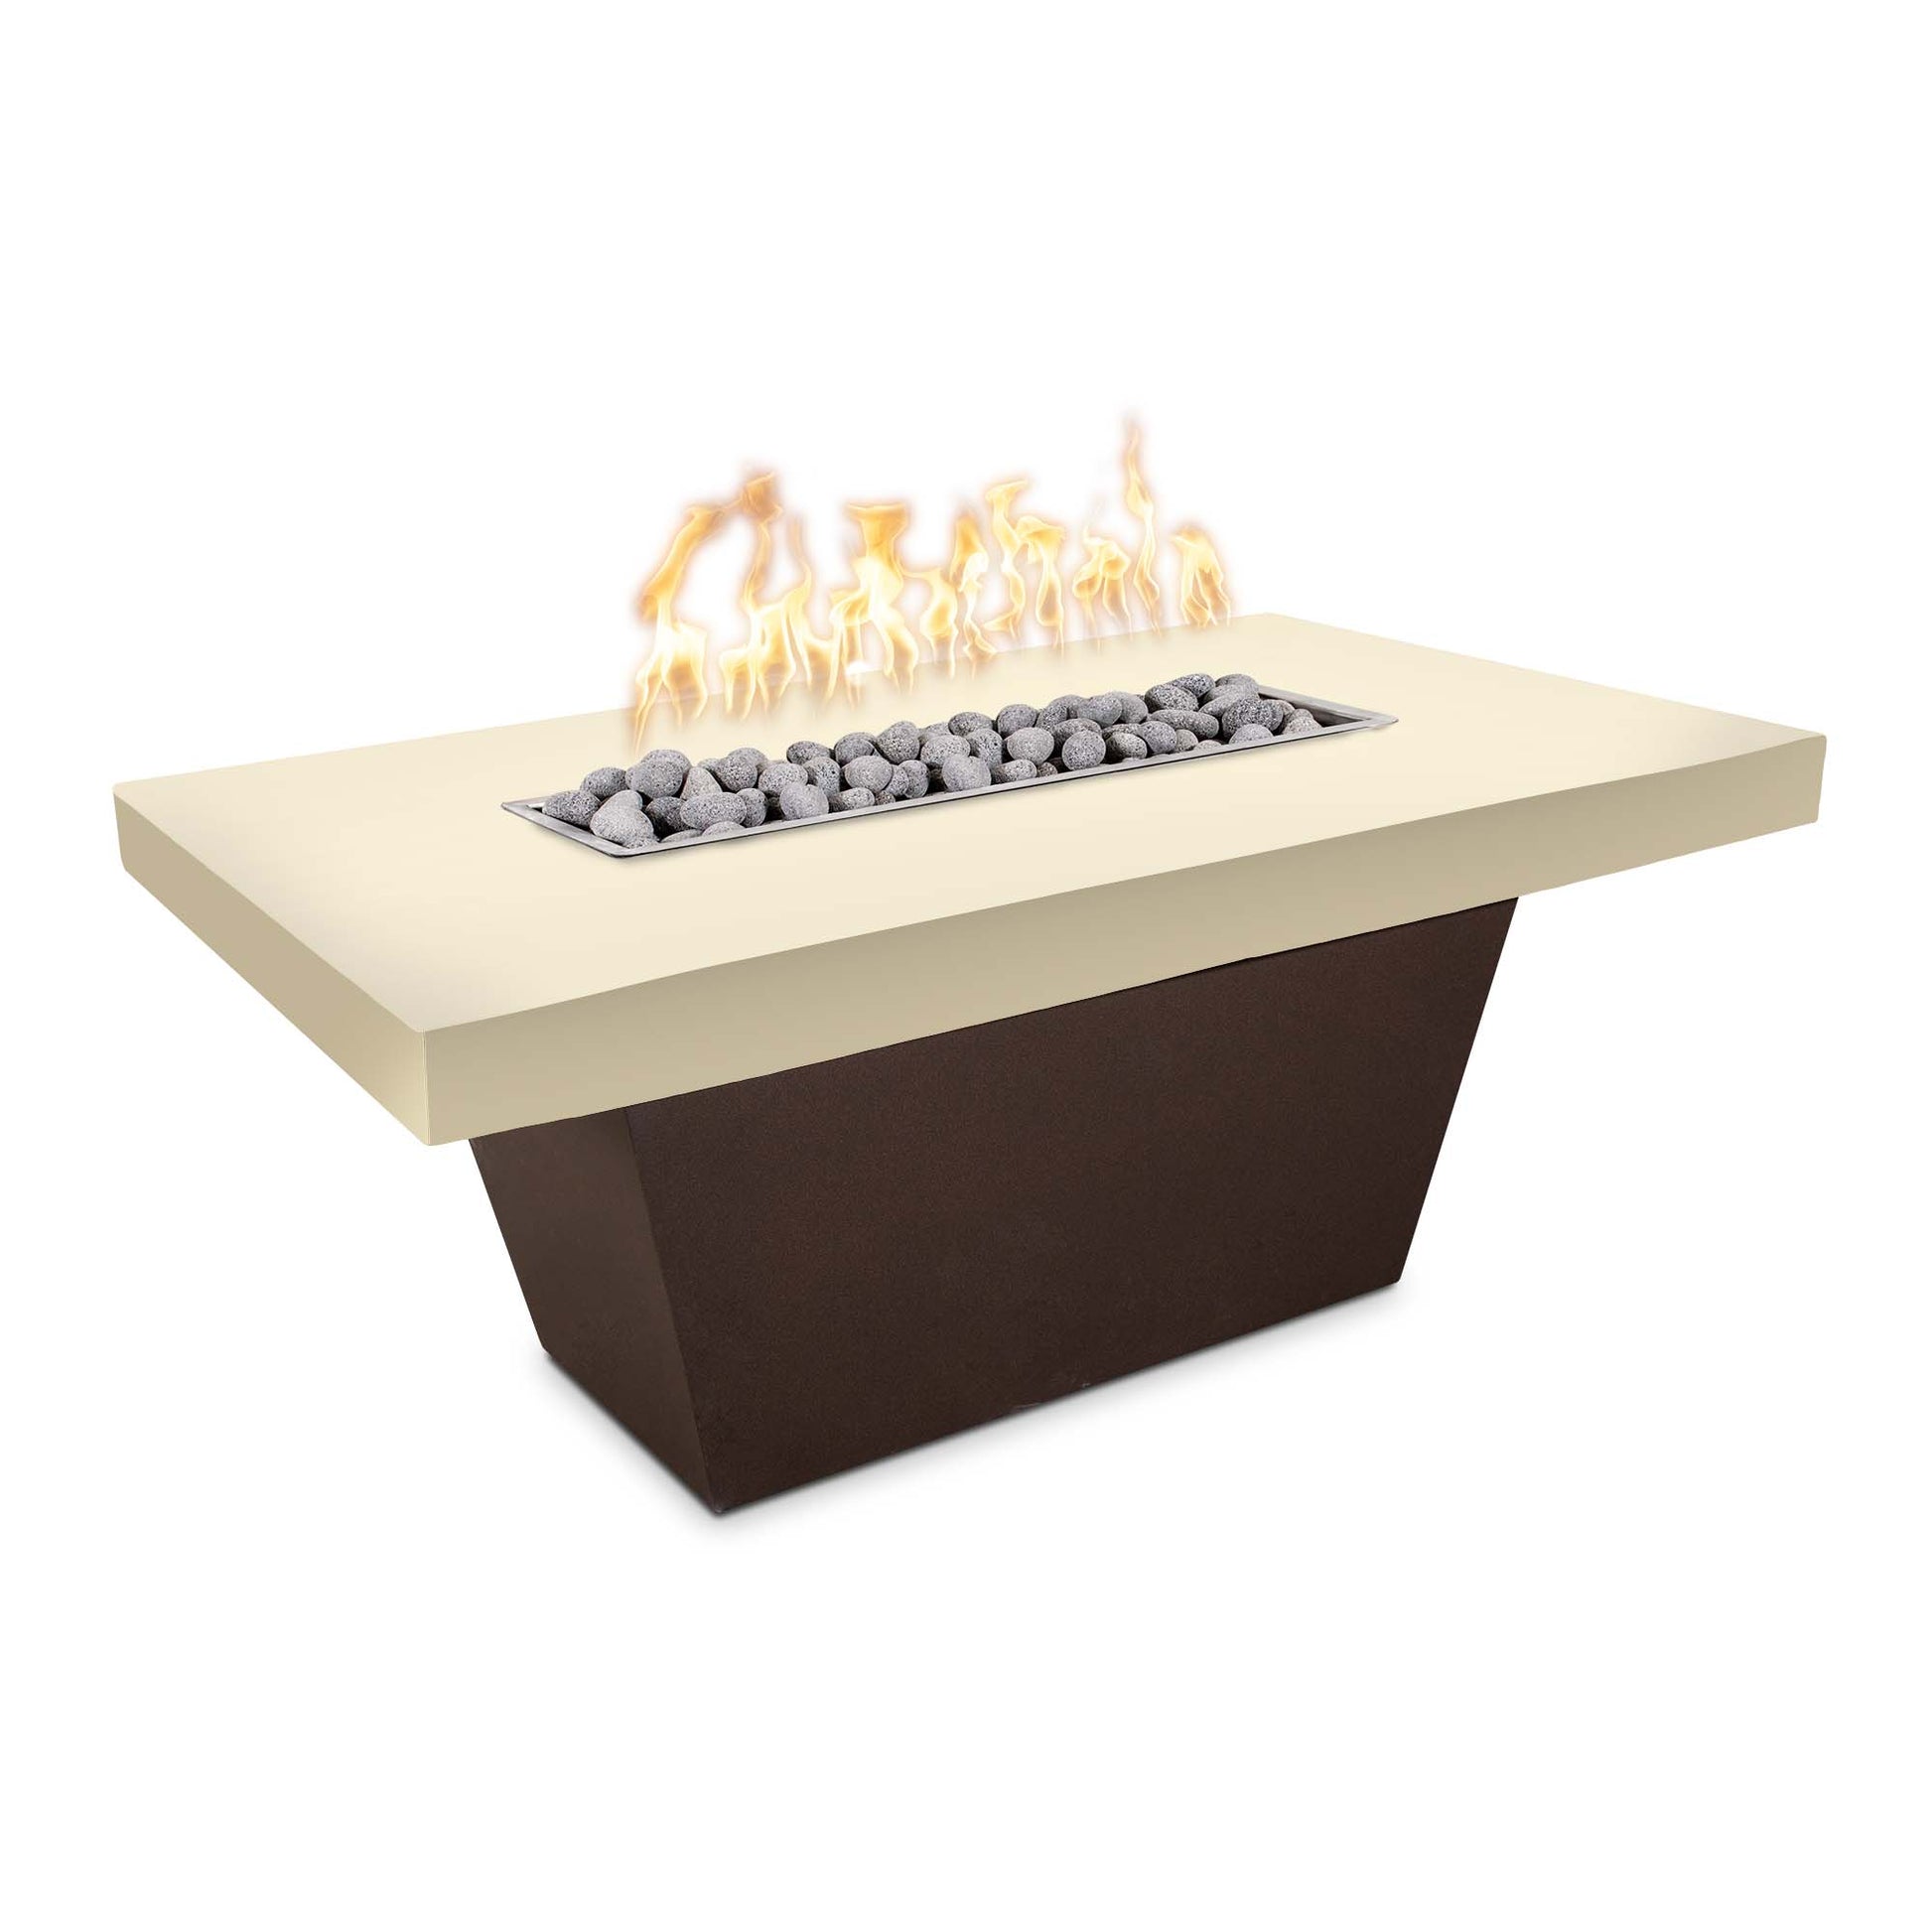 The Outdoor Plus Tacoma 48" Black Concrete Top & White Powder Coated Base Liquid Propane Fire Table with Match Lit Ignition